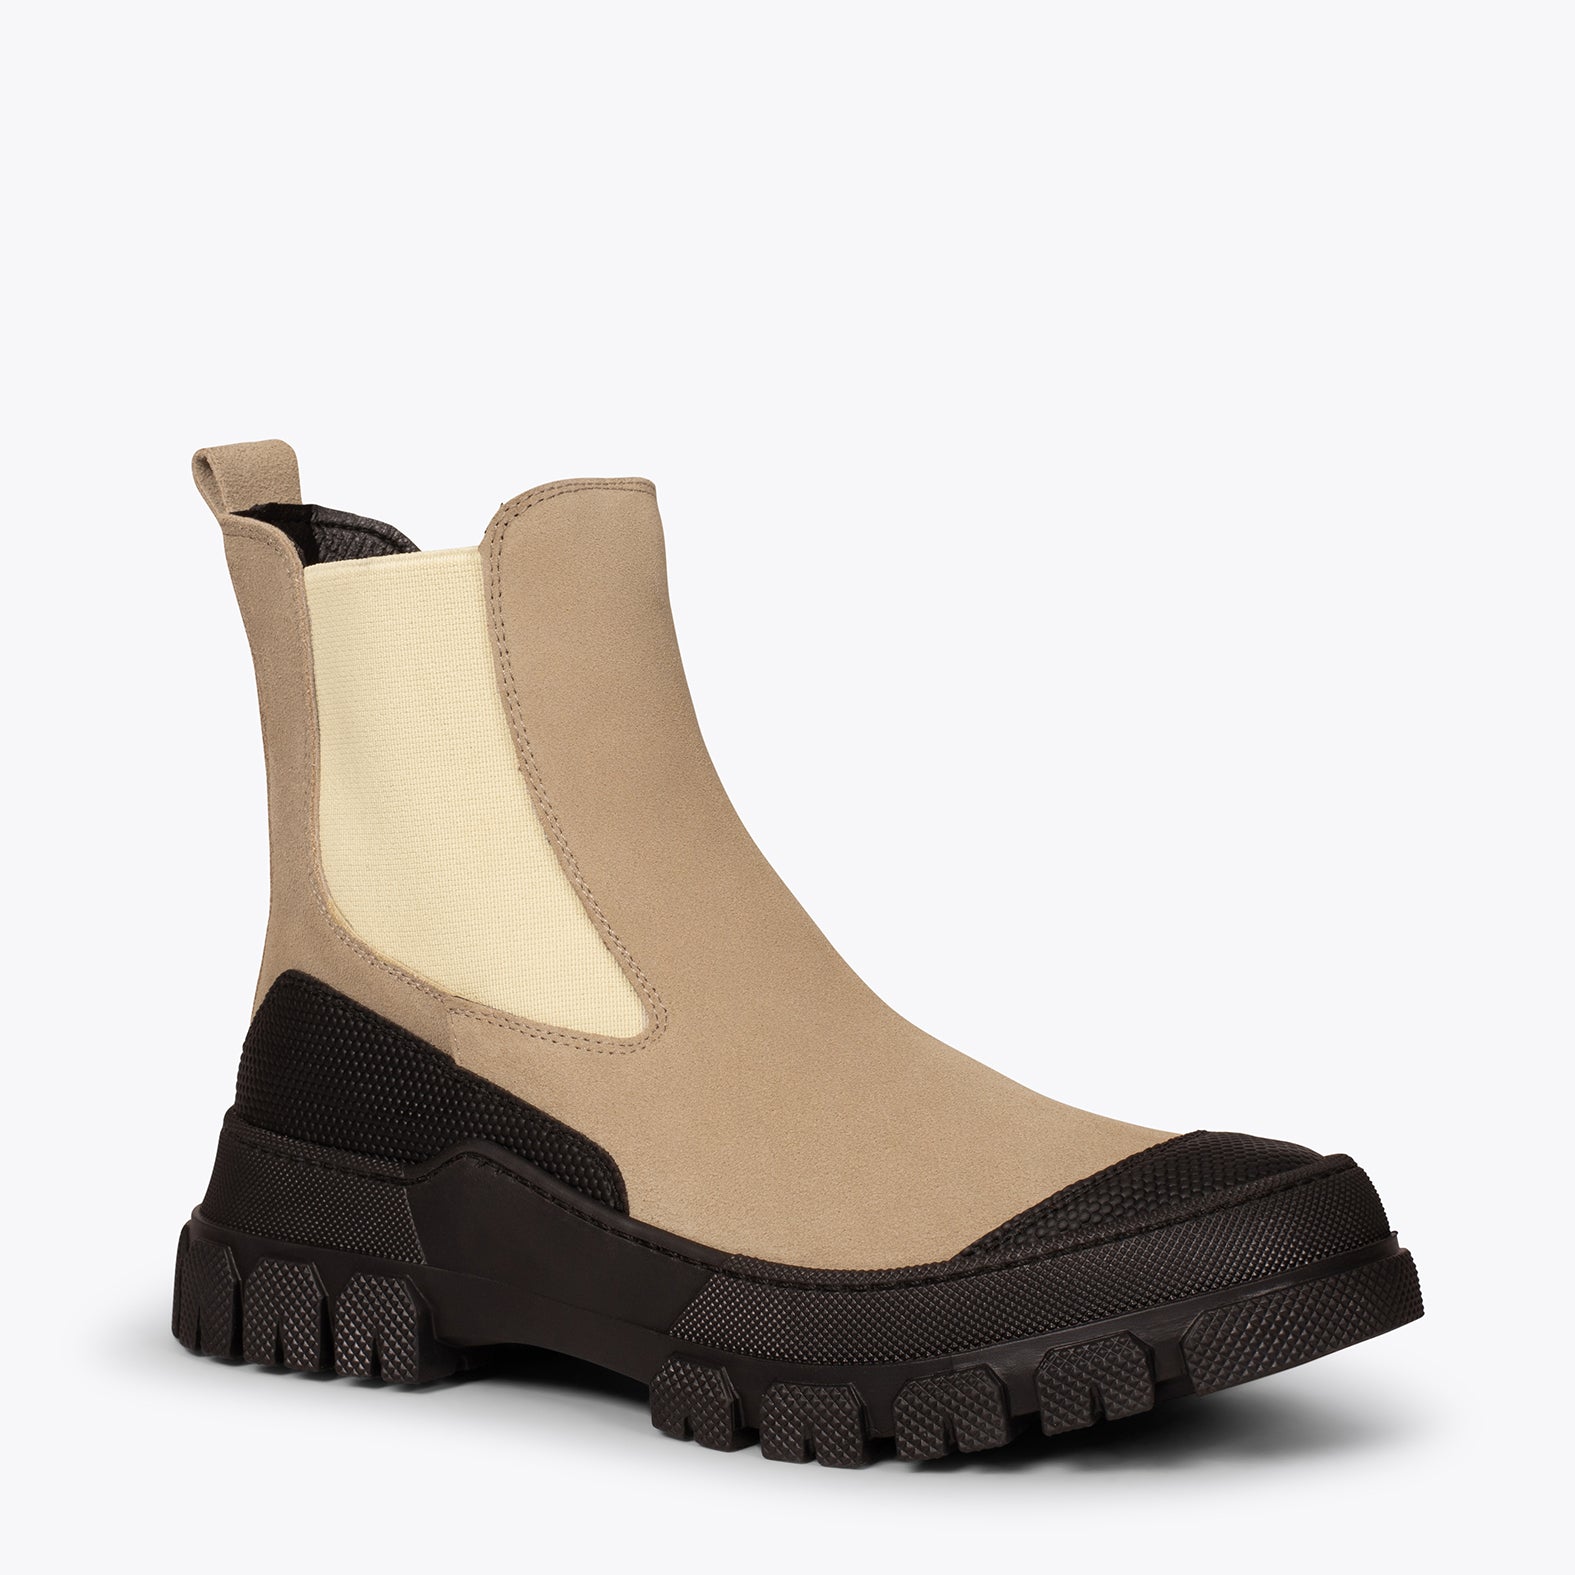 BROOKLYN - BEIGE track booties with rubber toe